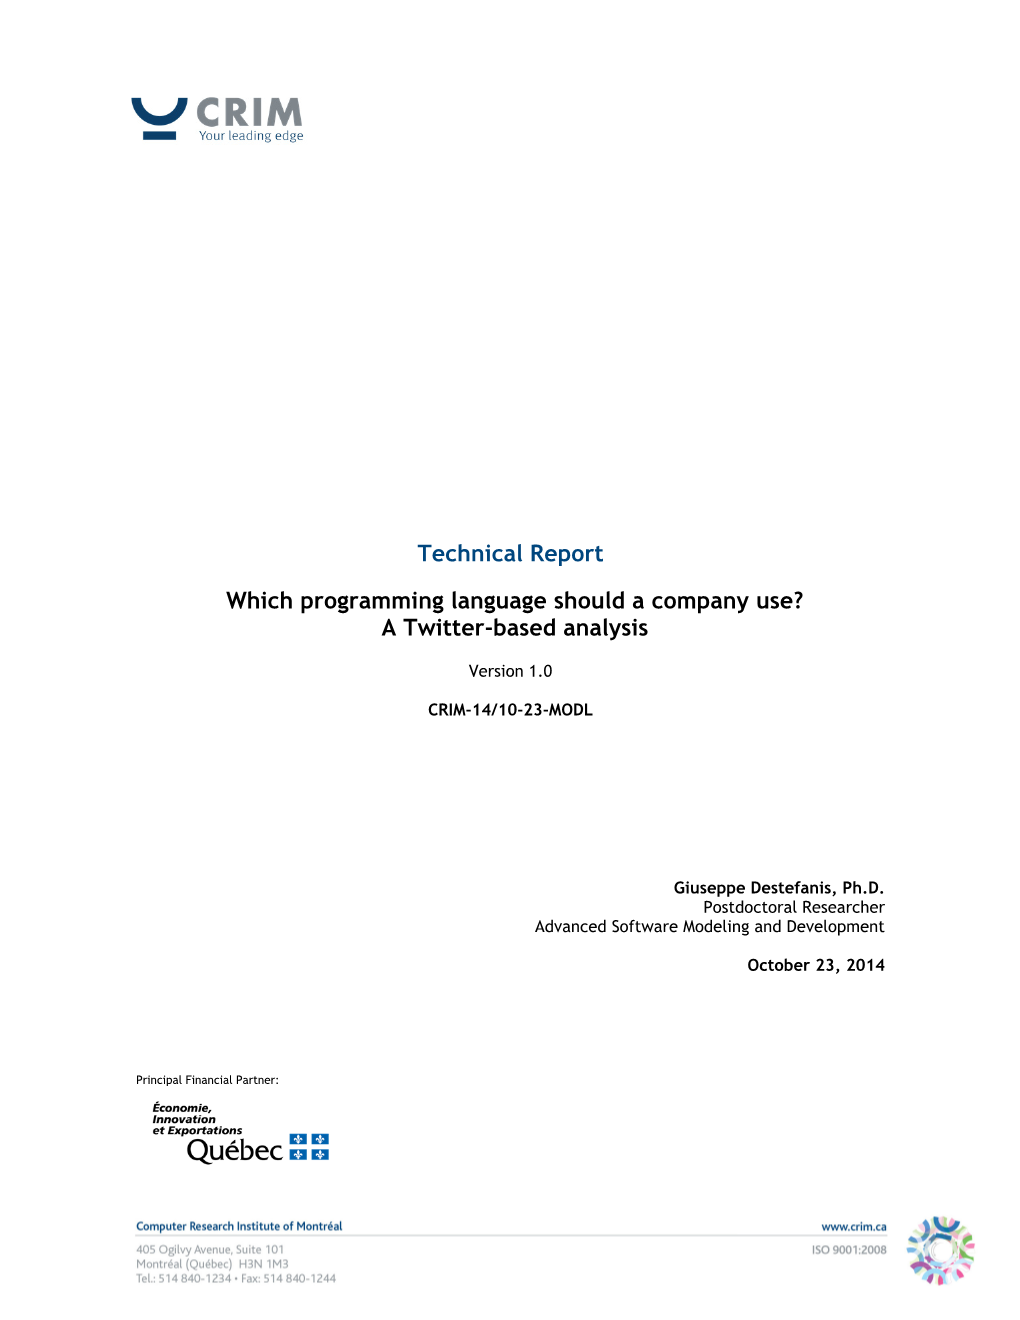 Technical Report Which Programming Language Should a Company Use? a Twitter-Based Analysis